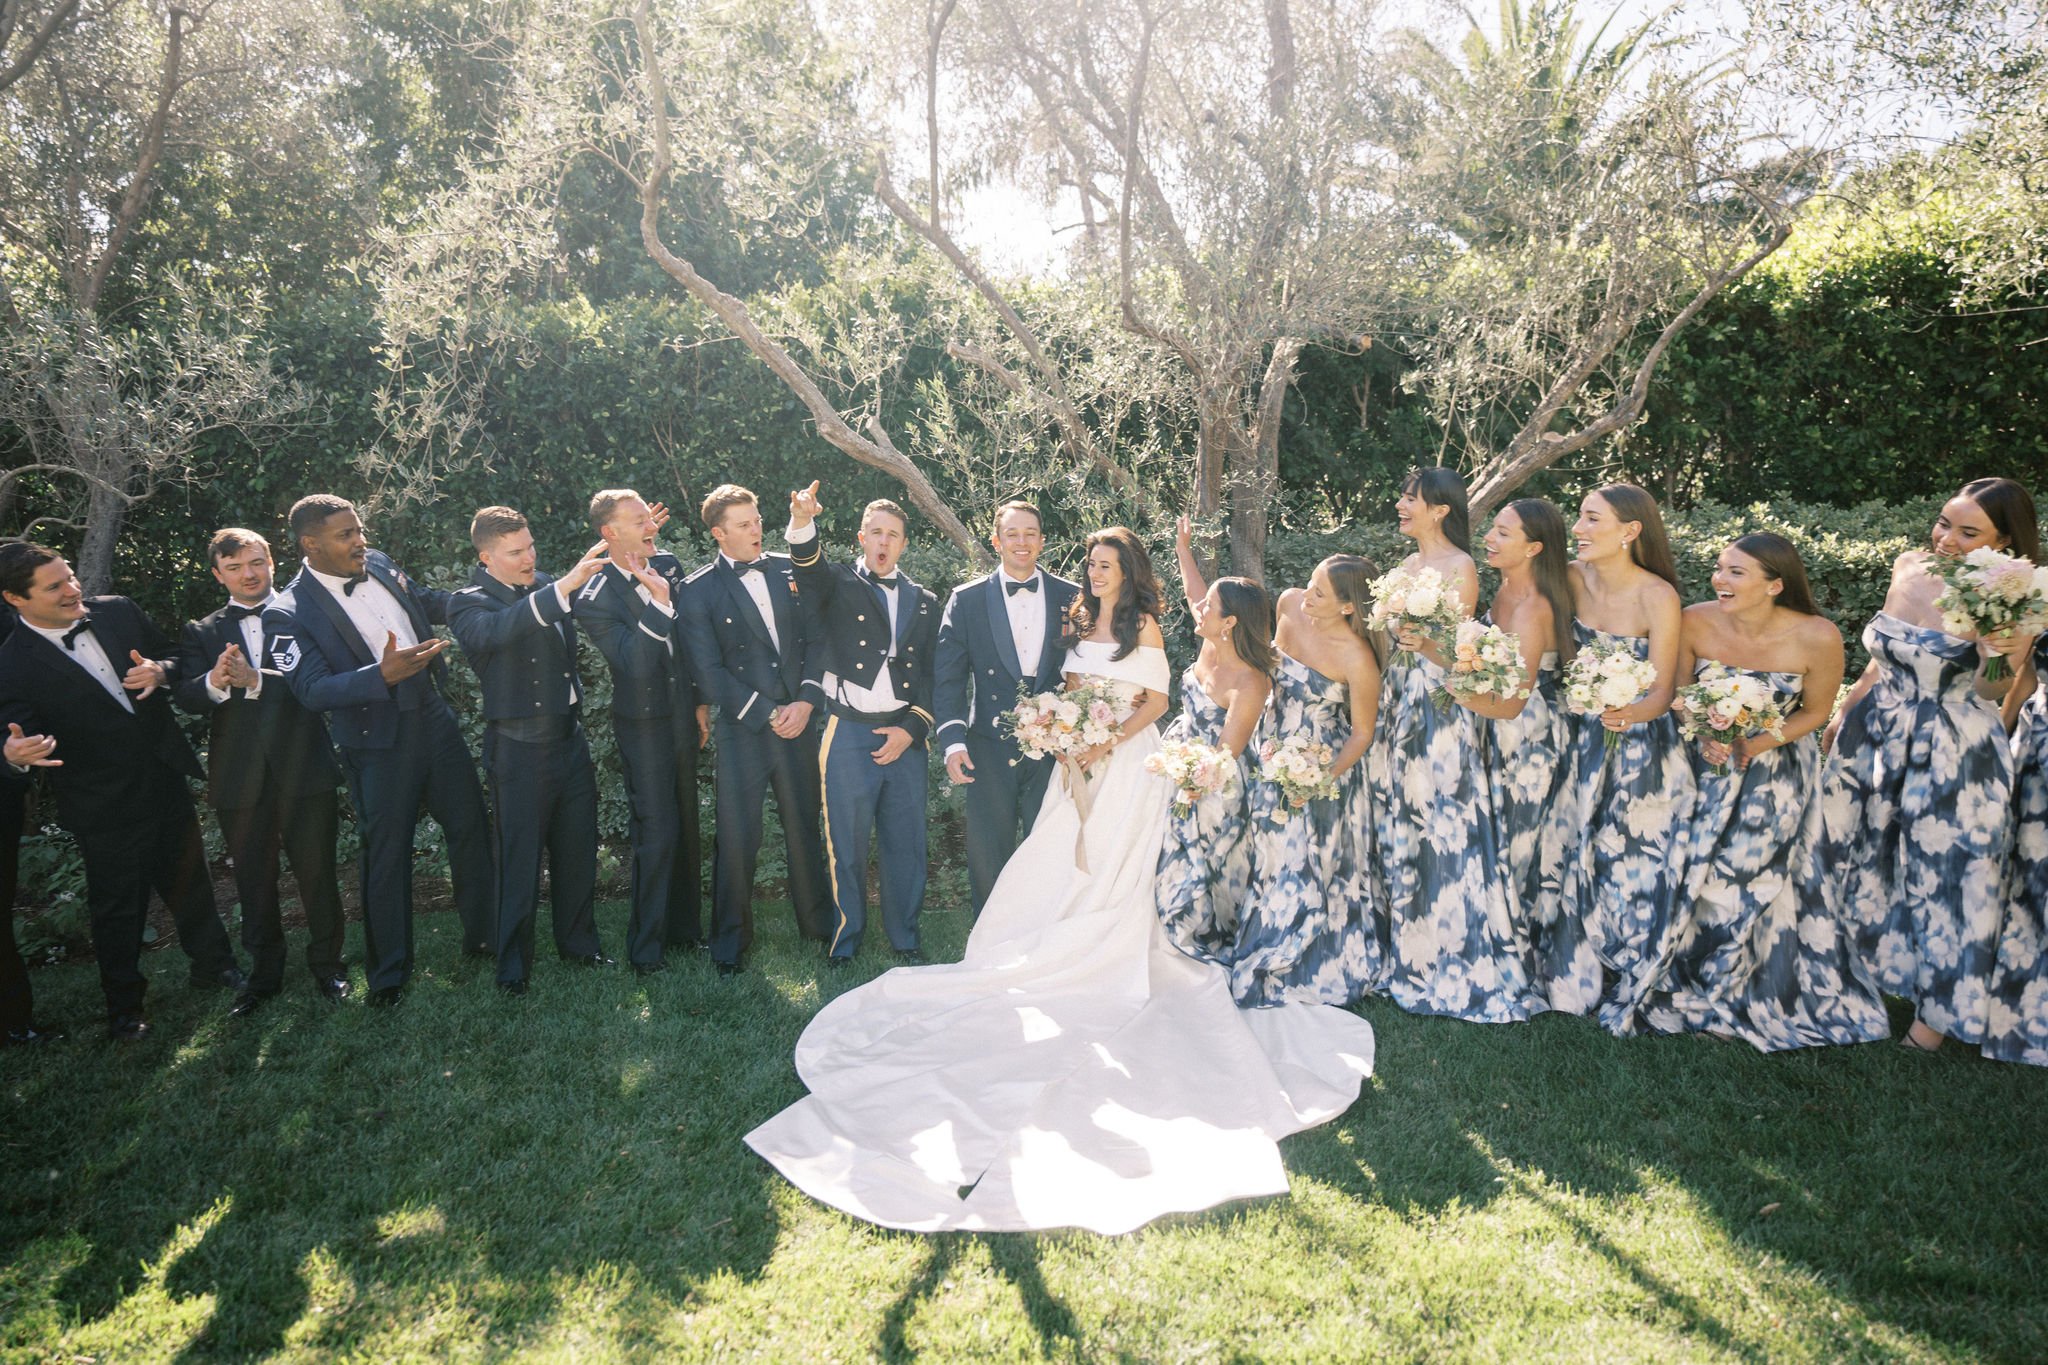 www.santabarbarawedding.com | Kurt Boomer Photography | Details, Darling | Alexis Ireland Florals | Couple and Bridal Party 